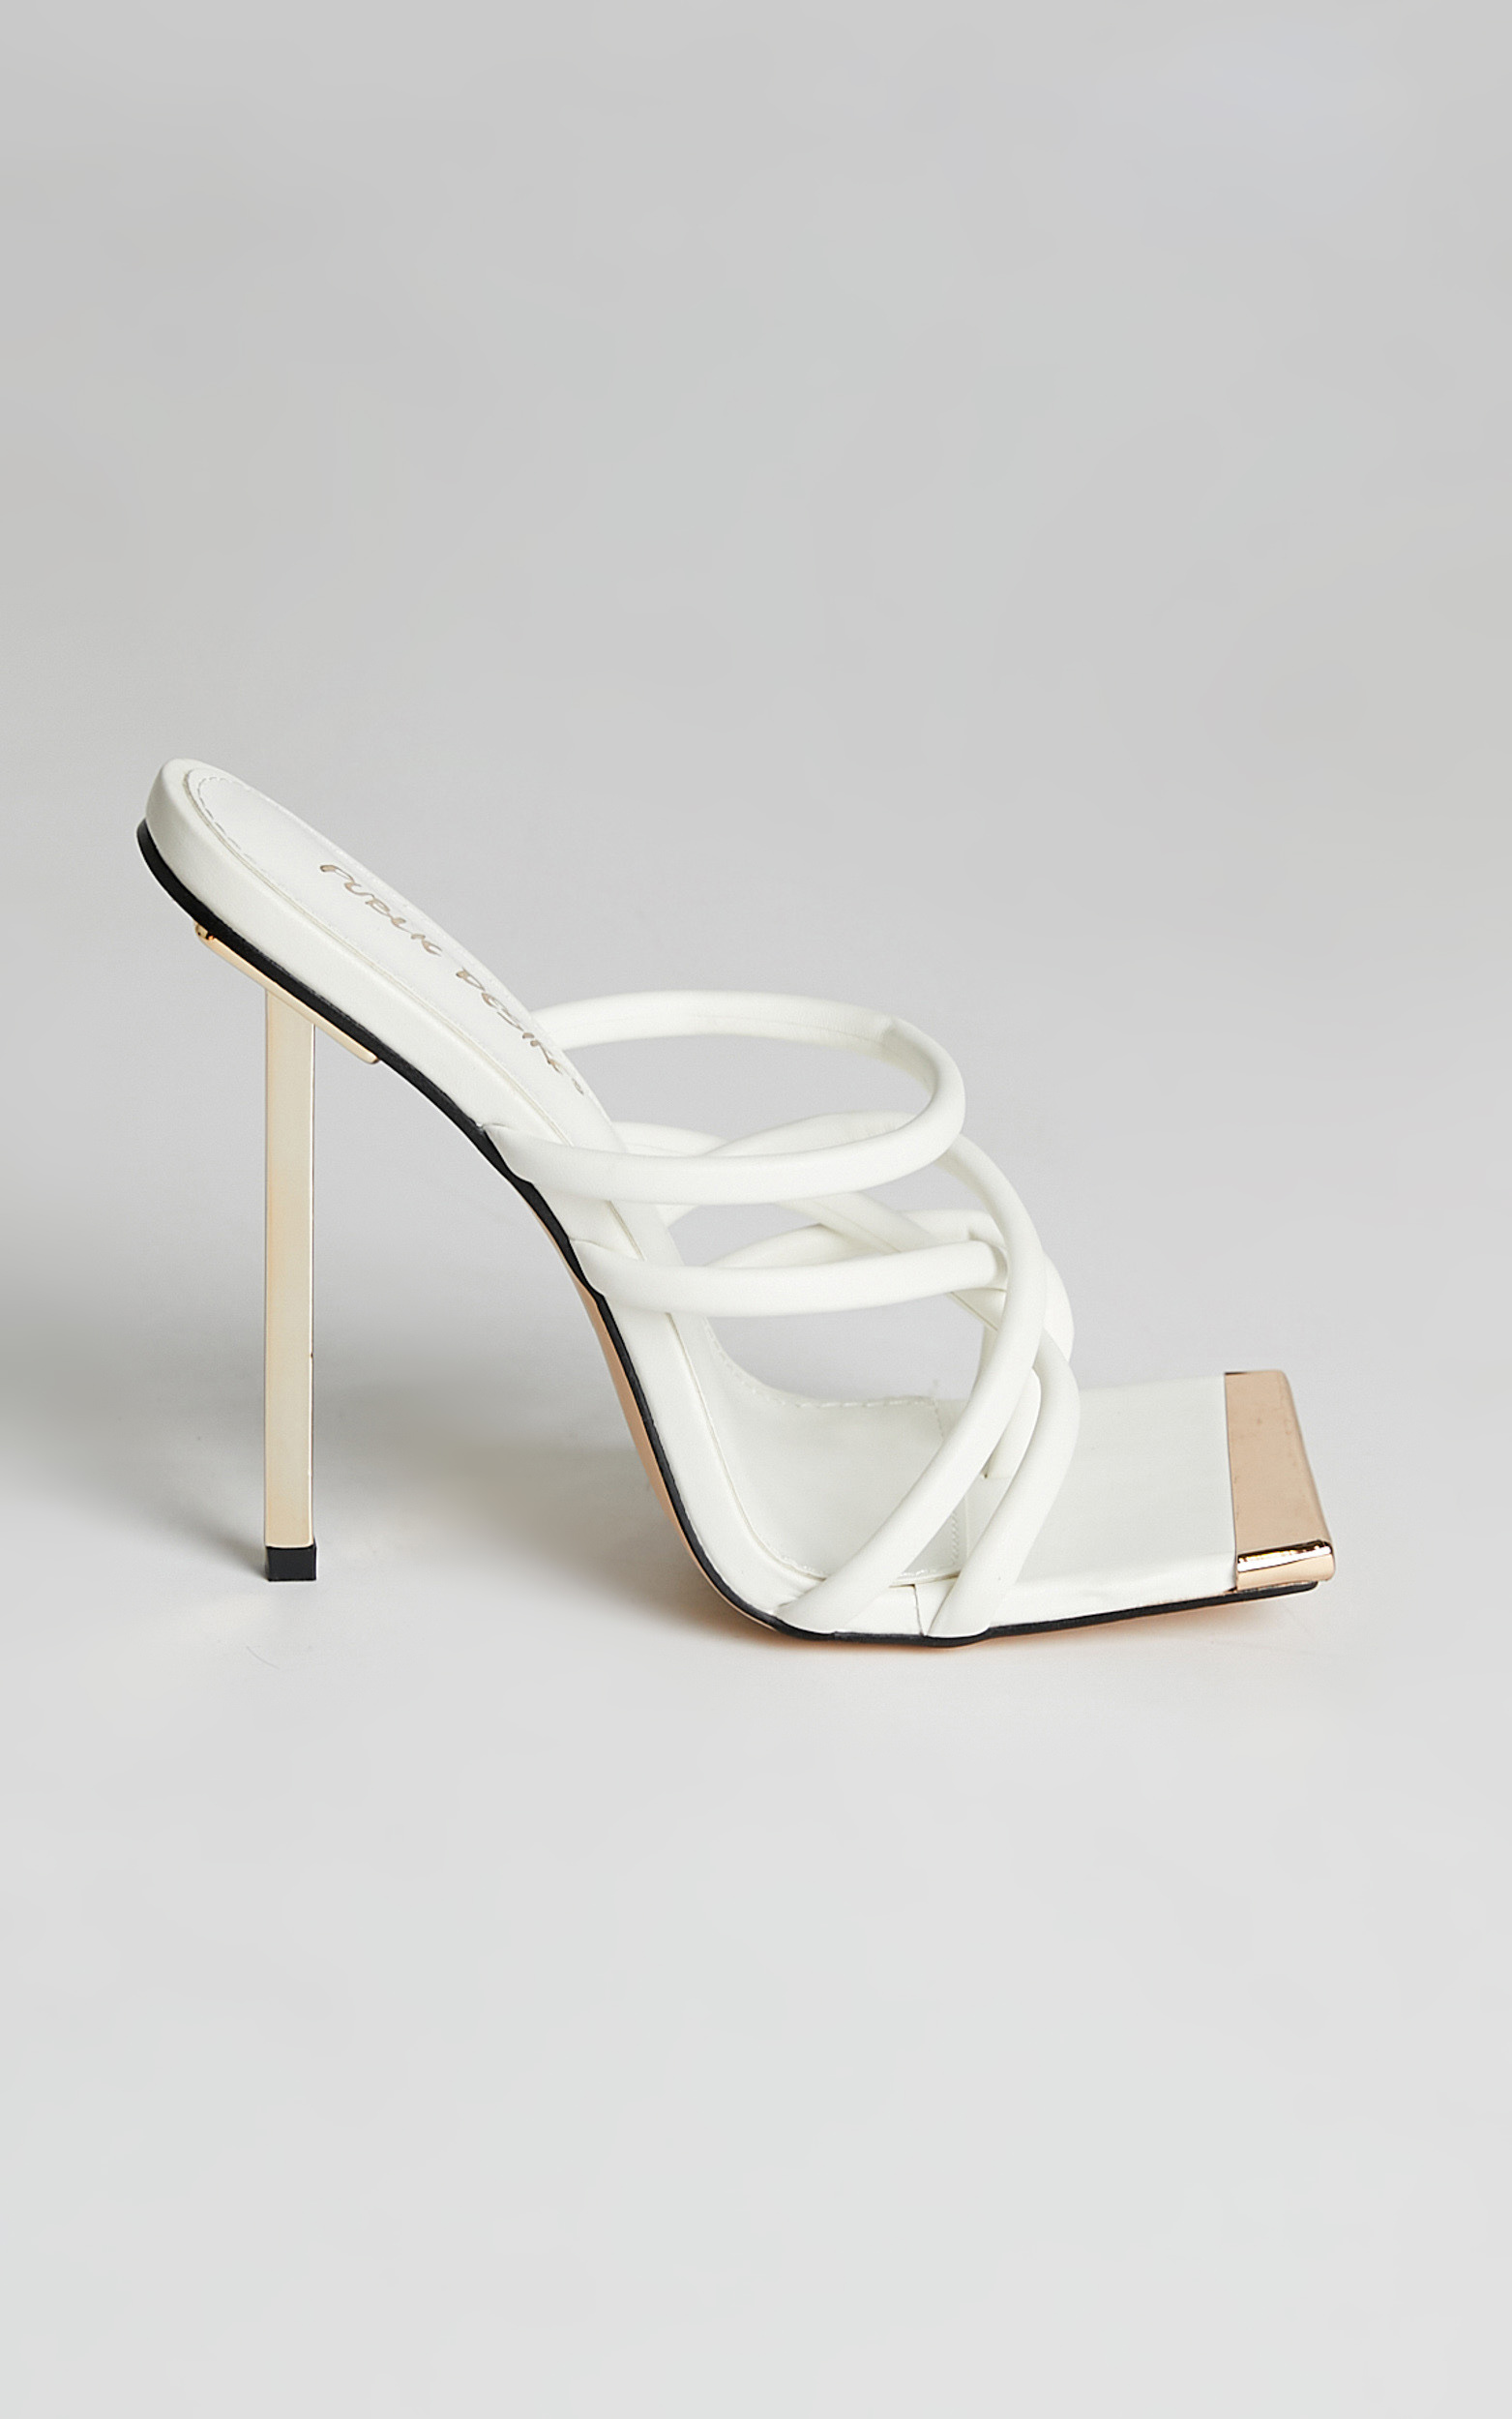 Public Desire - Coincidence Strappy Square Toe Metallic Stiletto Heels in White - 05, WHT3, hi-res image number null